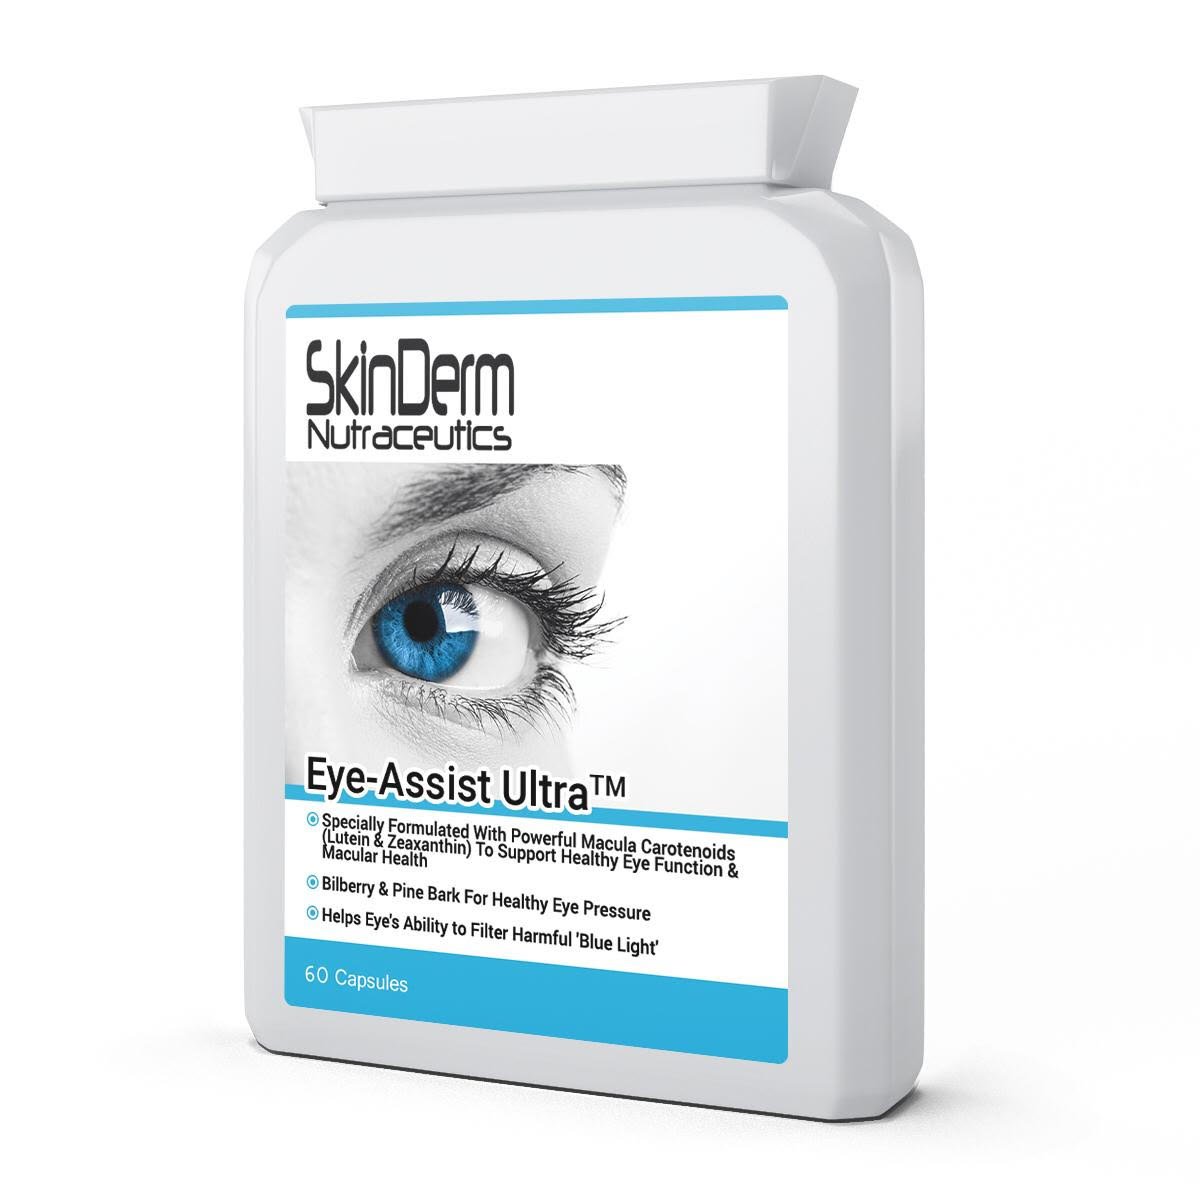 #Eye_Assist has been specially formulated to support normal #healthyeyefunction& #macularhealth. provides a daily combination of powerful macula carotenoids with #herbs #vitamins #minerals known for their #EyeSupport properties skinderm.co.uk amzn.to/2zP5s0N